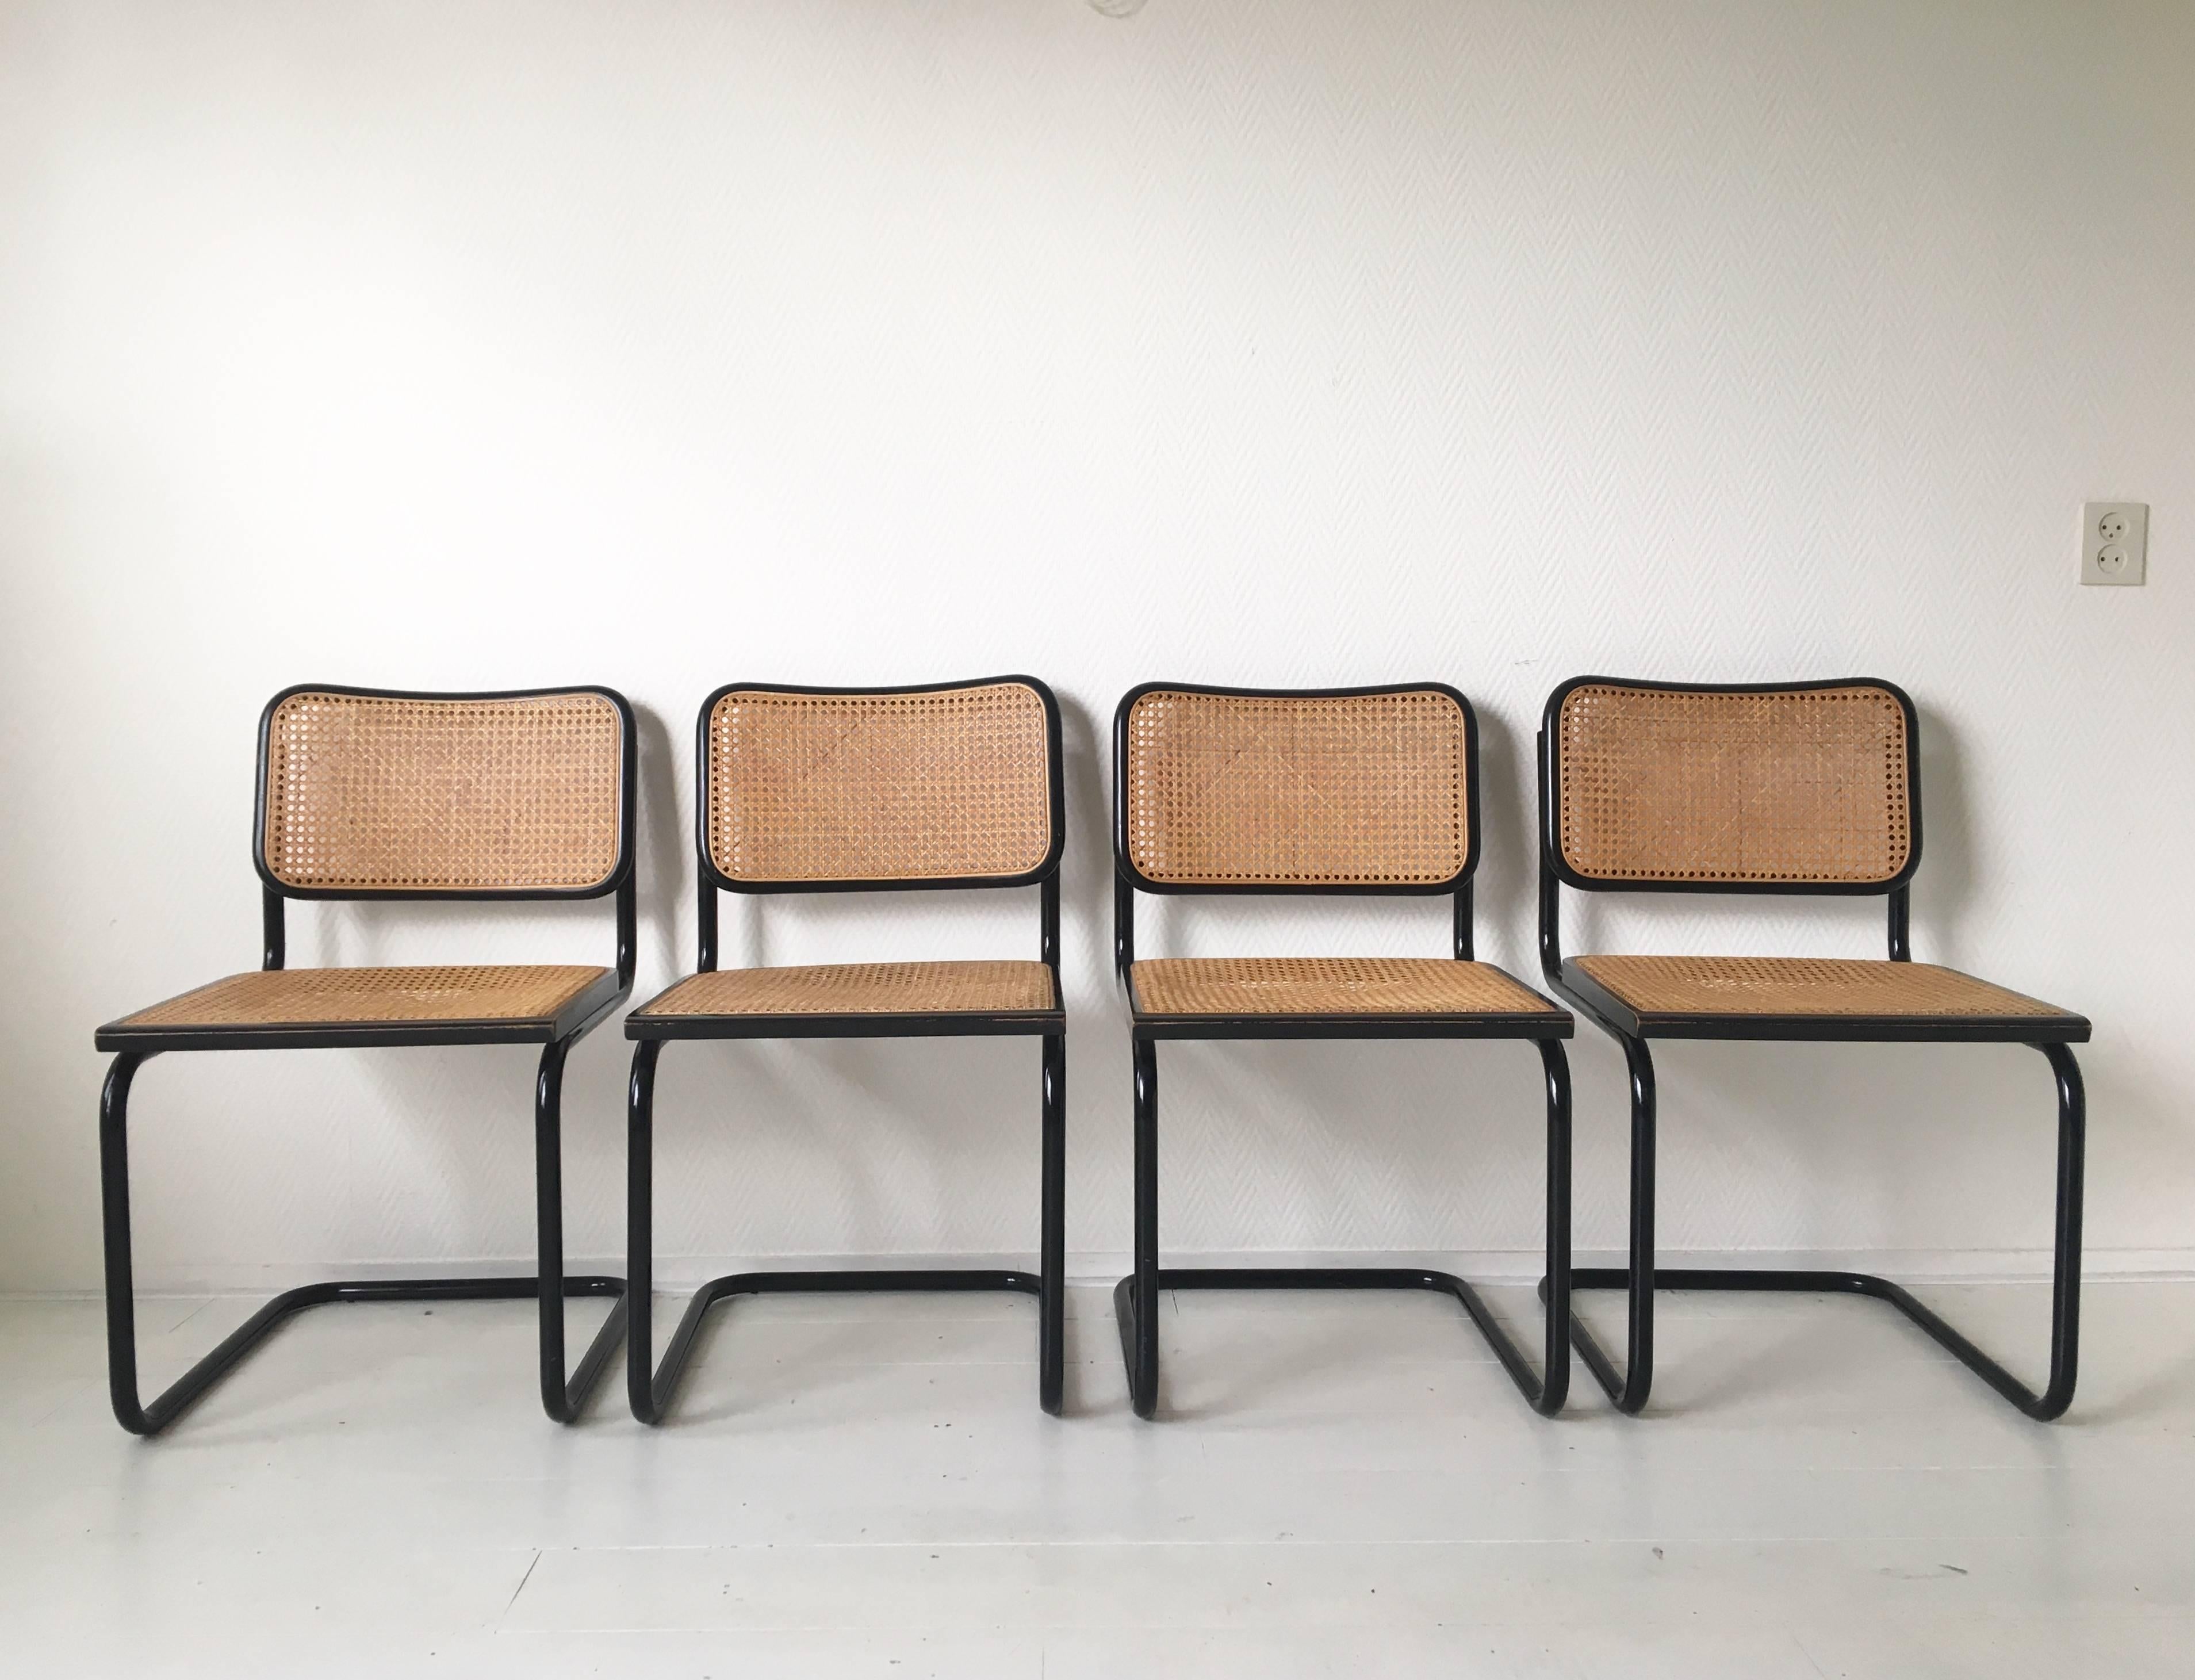 These four iconic chairs were designed and manufactured in Italy, circa 1970s. They feature a black tubular base with caned seats and backrests. The chairs remain in a very good and sturdy vintage condition and show only minimal signs of age and